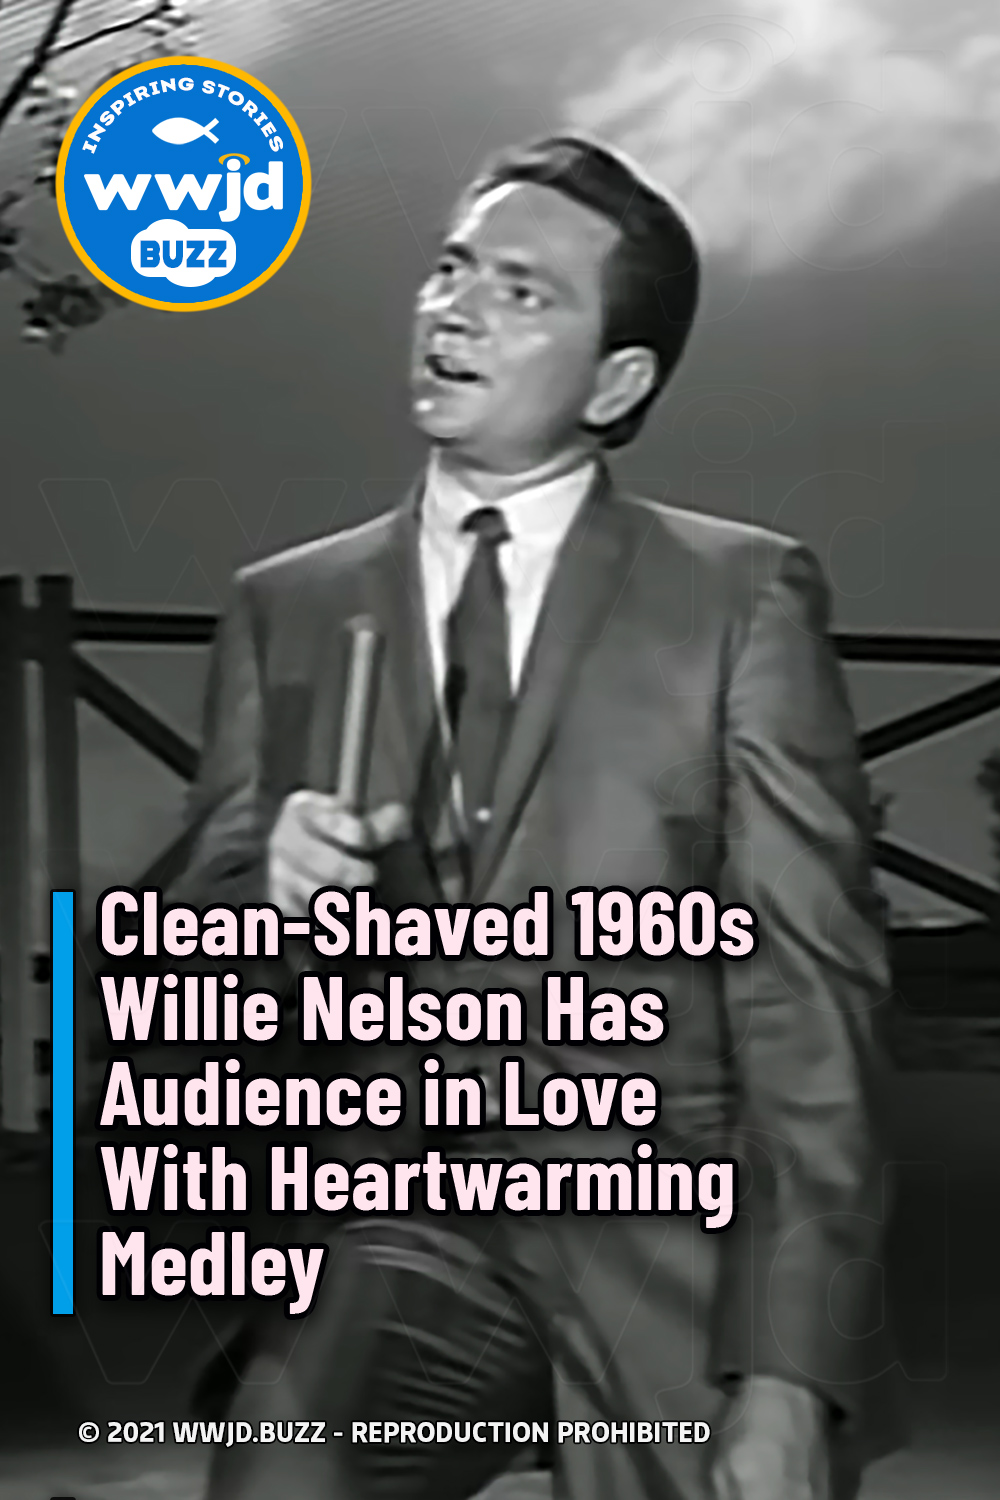 Clean-Shaved 1960s Willie Nelson Has Audience in Love With Heartwarming Medley